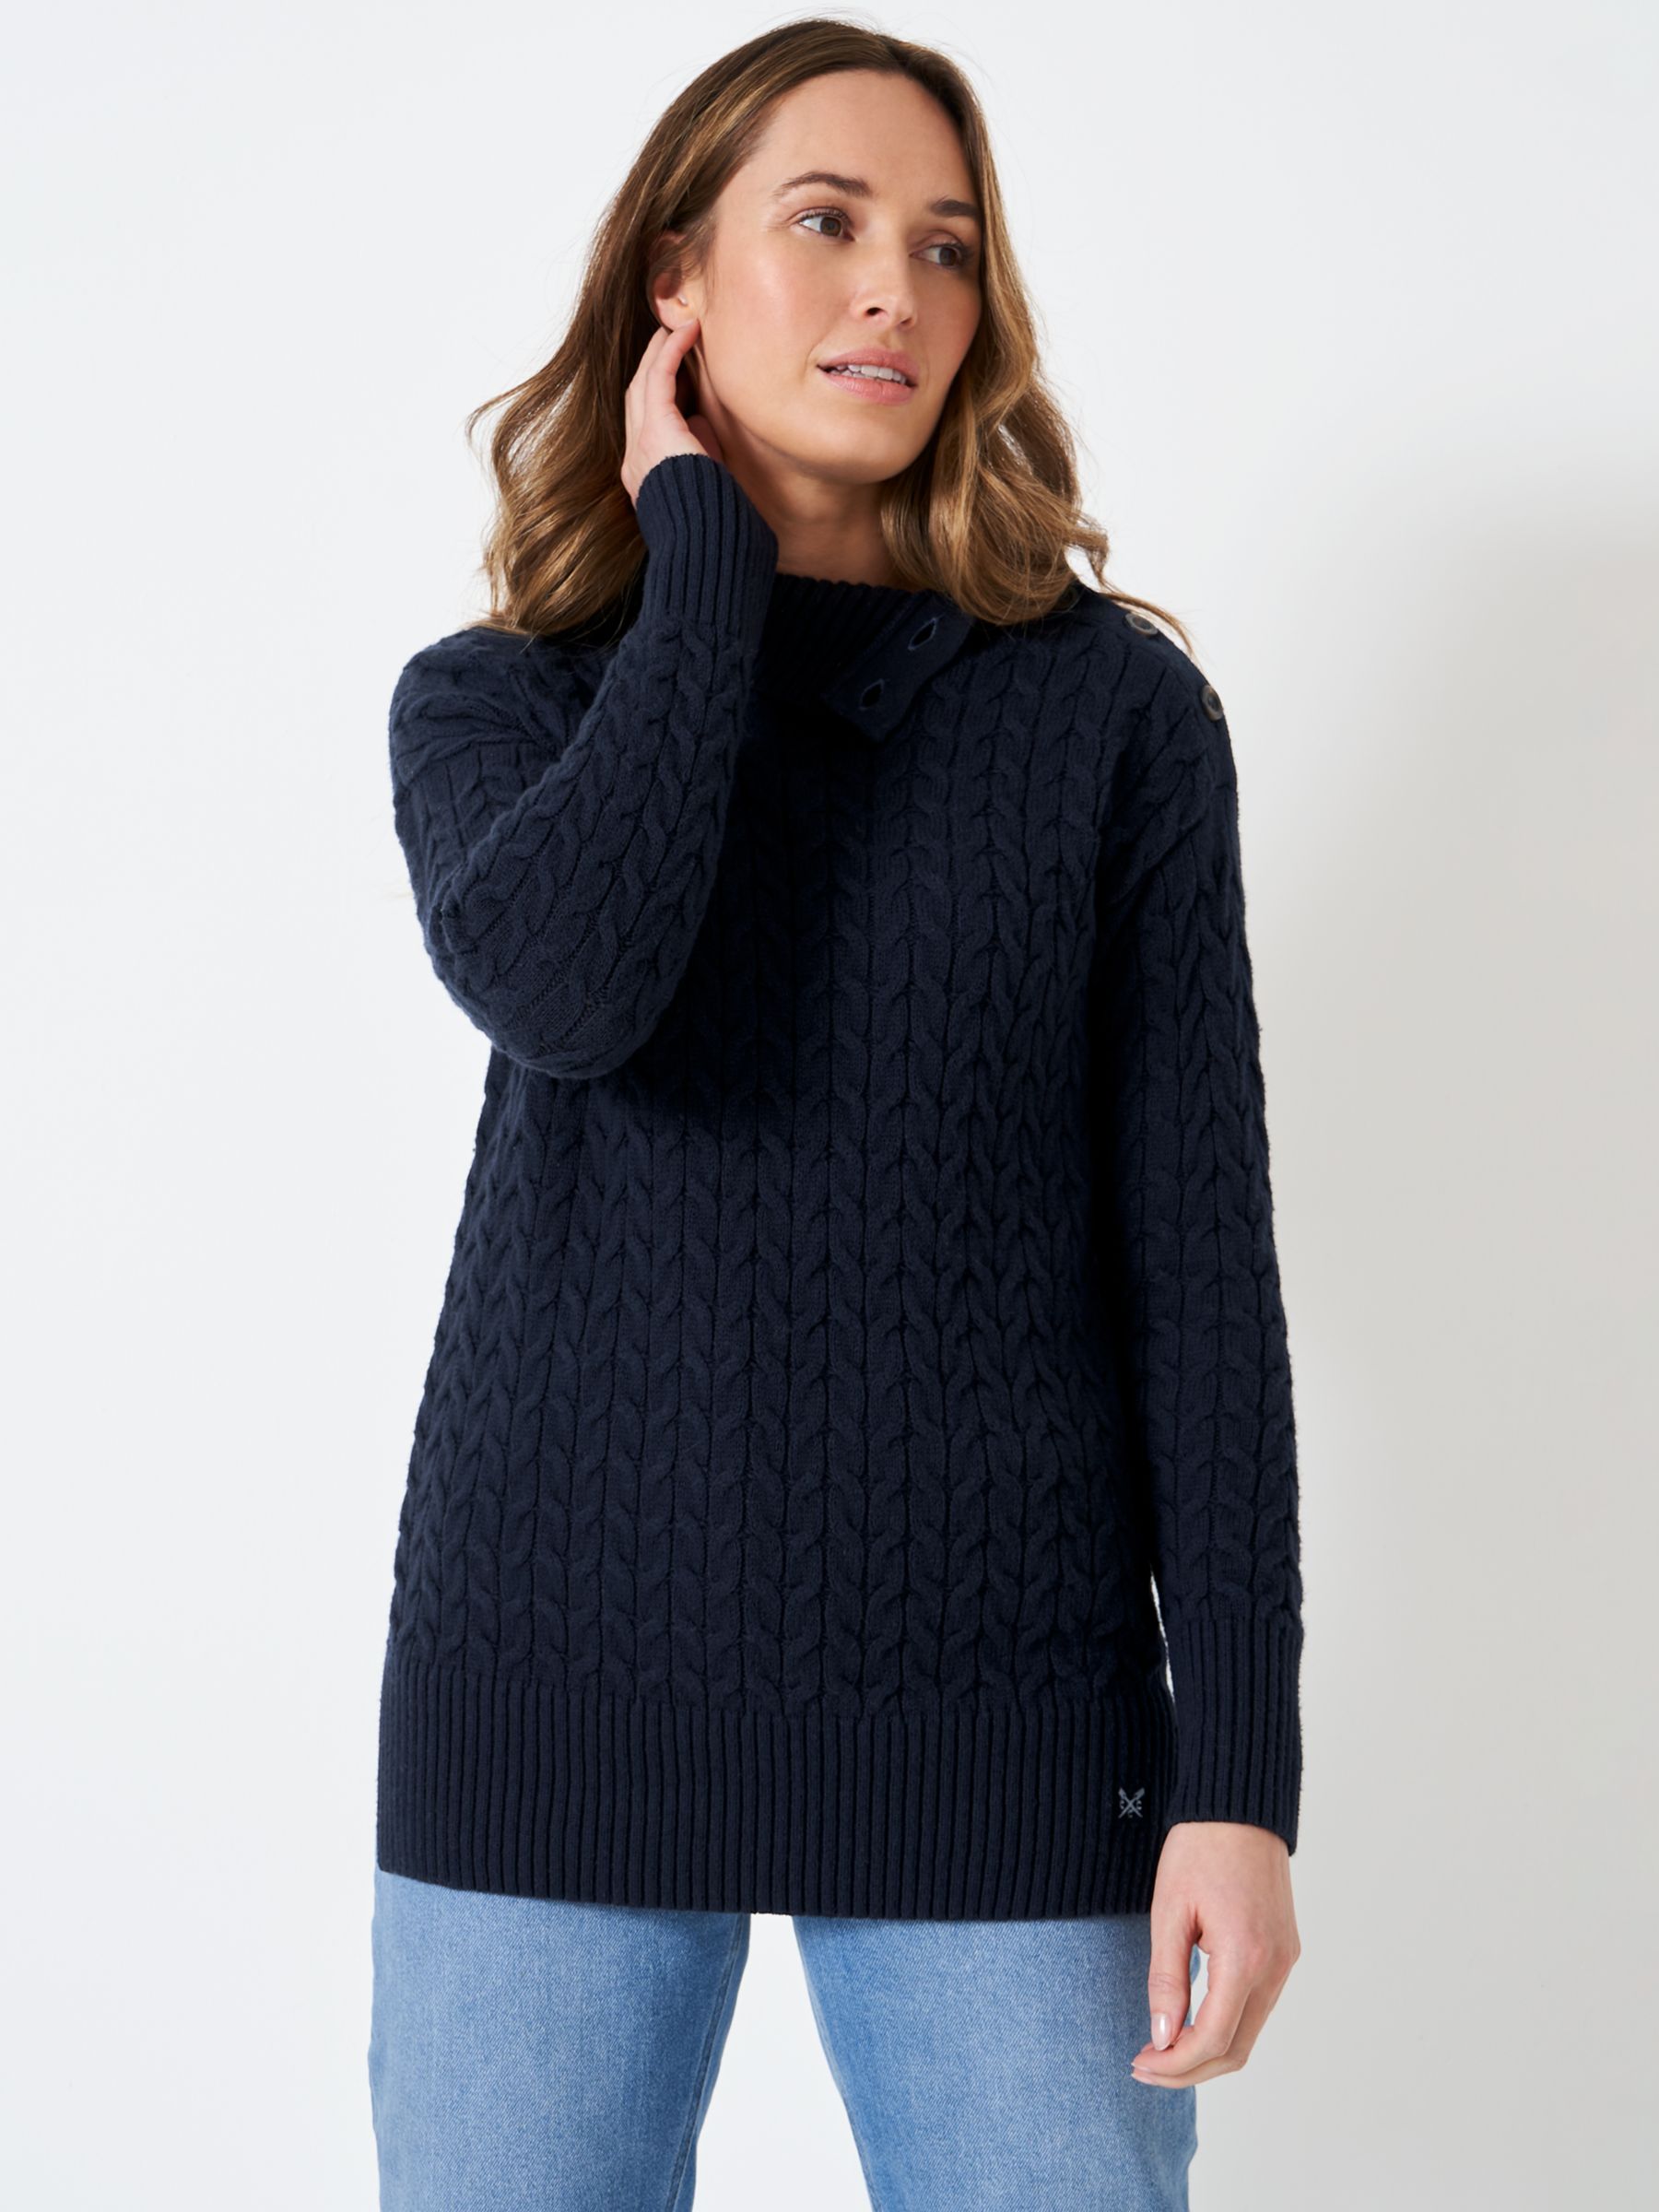 Crew Clothing Ida Cable Knit Wool Blend Jumper, Navy Blue at John Lewis ...